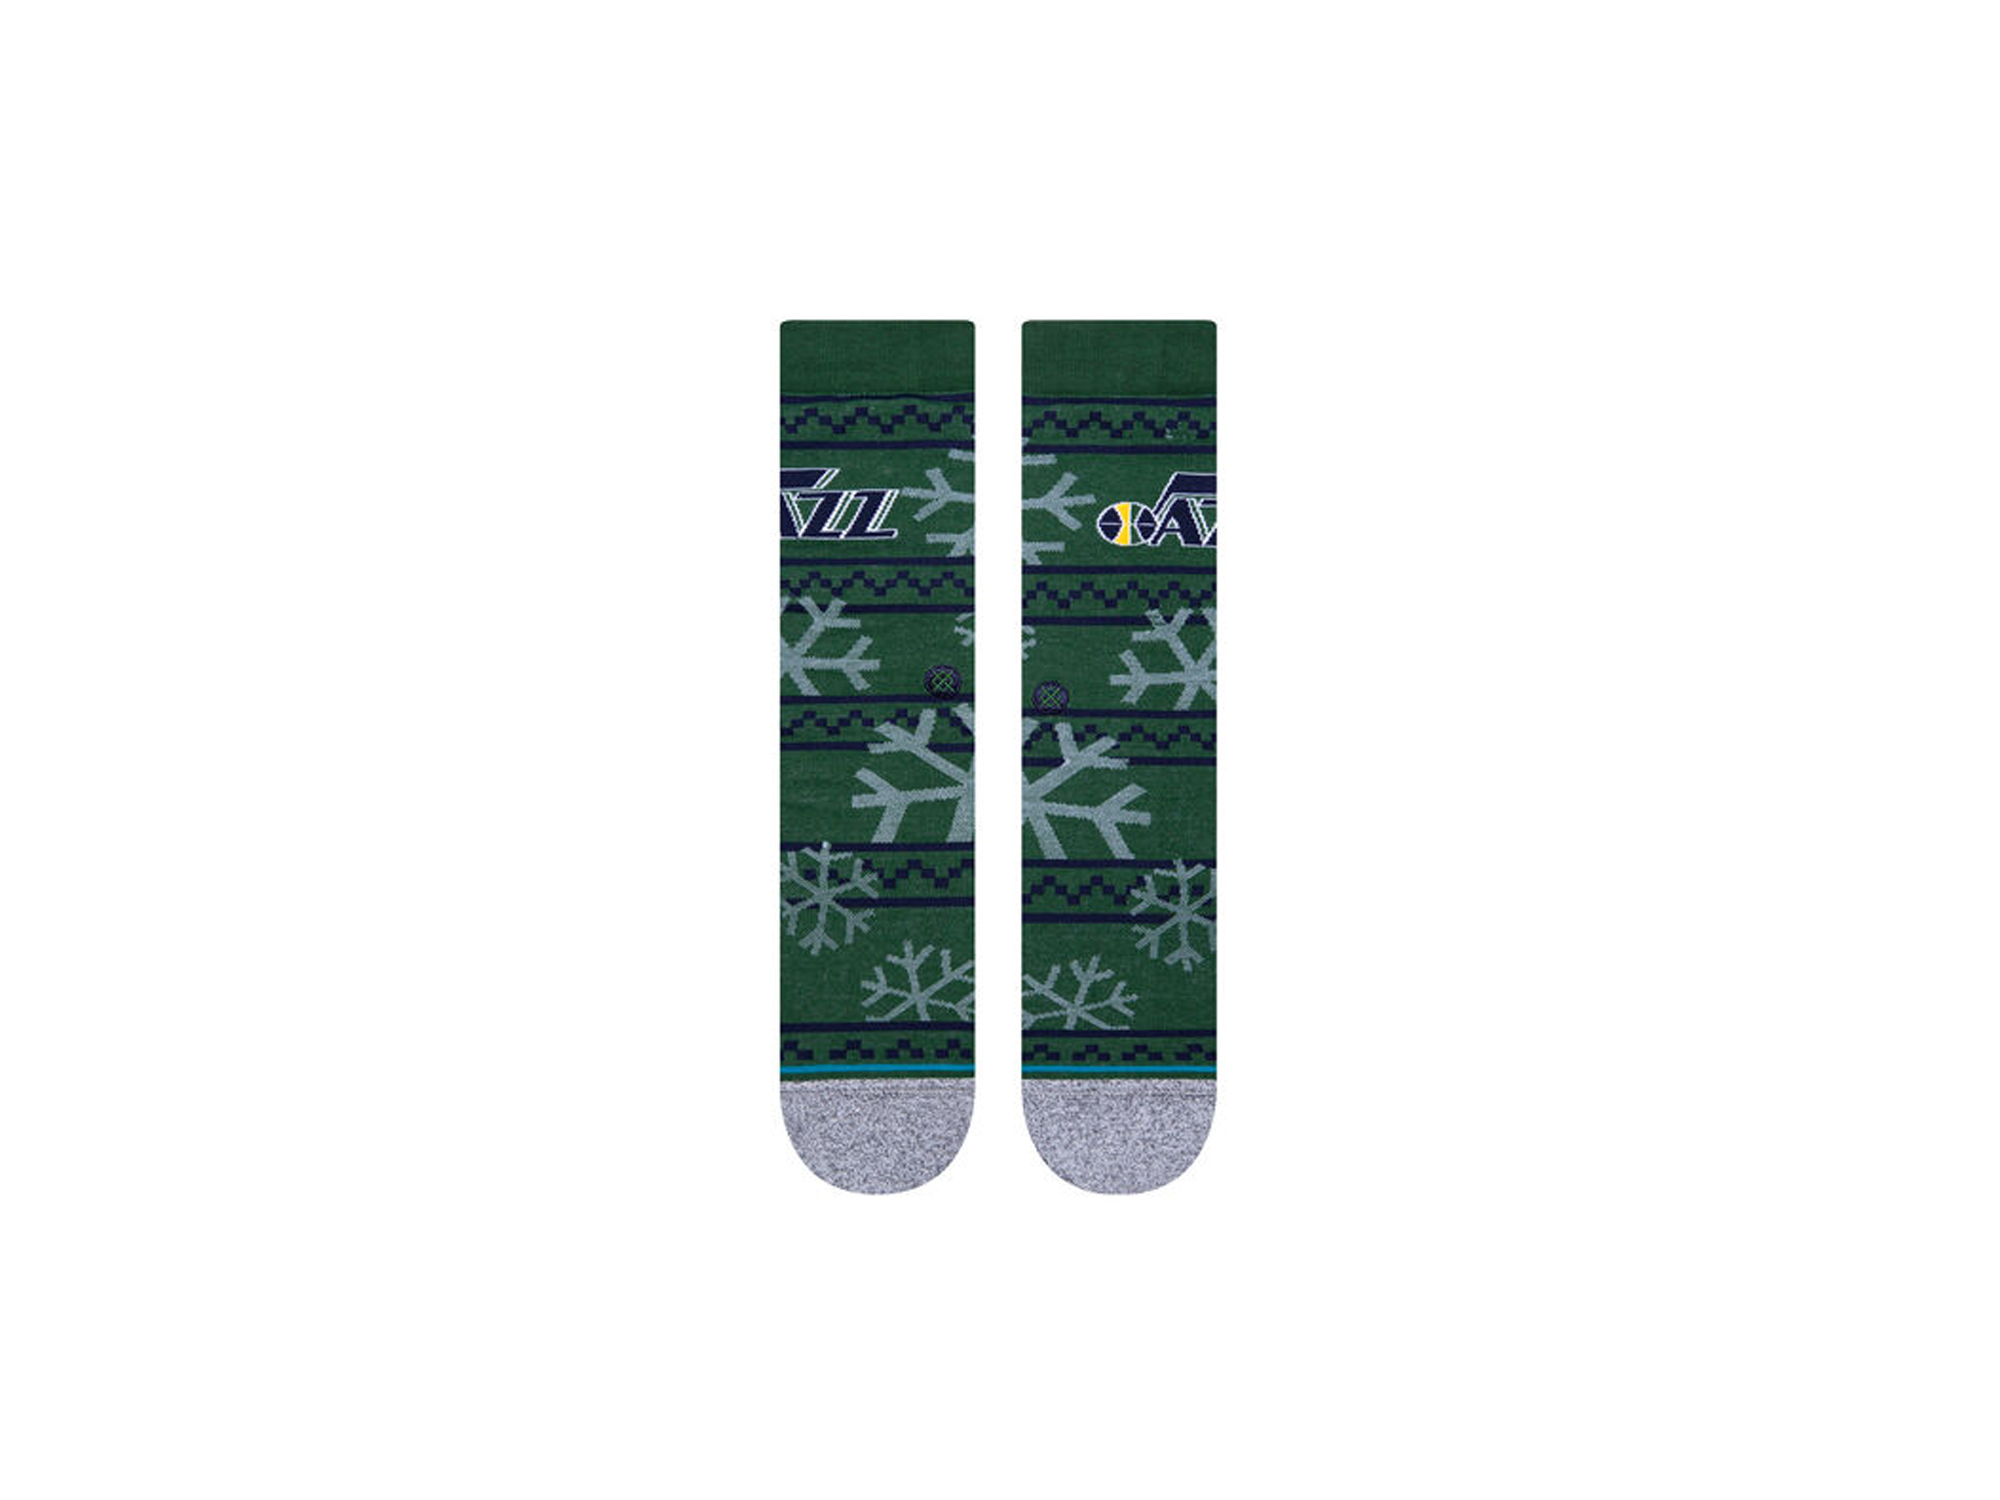 Stance Jazz Frosted 2 Crew Casual Socke